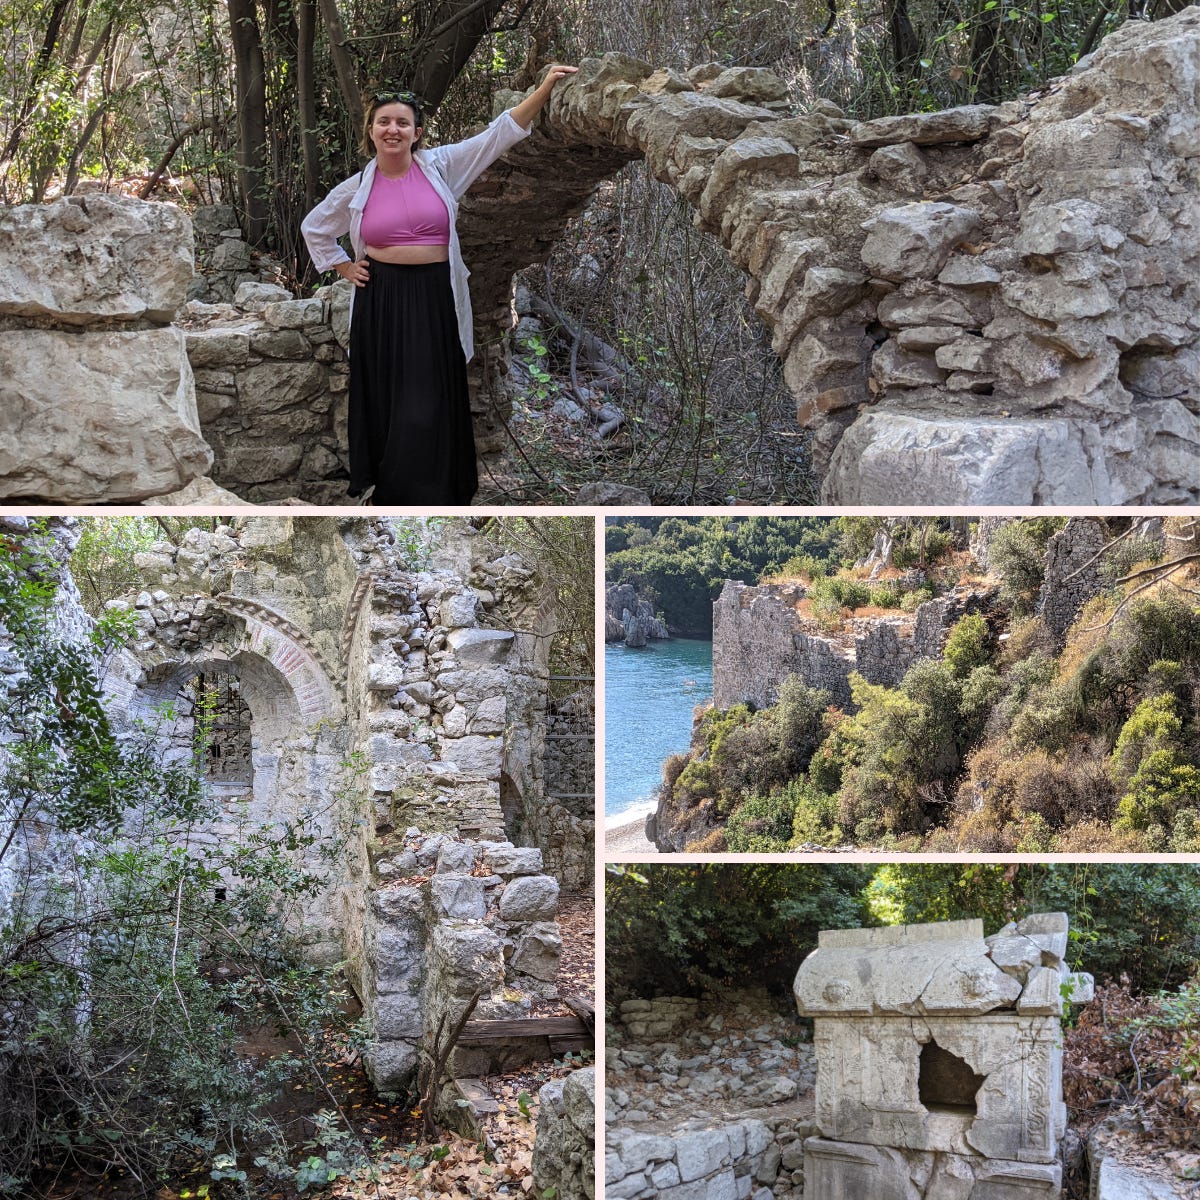 Four images of Olympos ruins: Iulia standing before an arch (top), elaborage patterns within broken walls (left), crumbled walls overlooking the sea (top-right), and an old tomb (bottom-right).